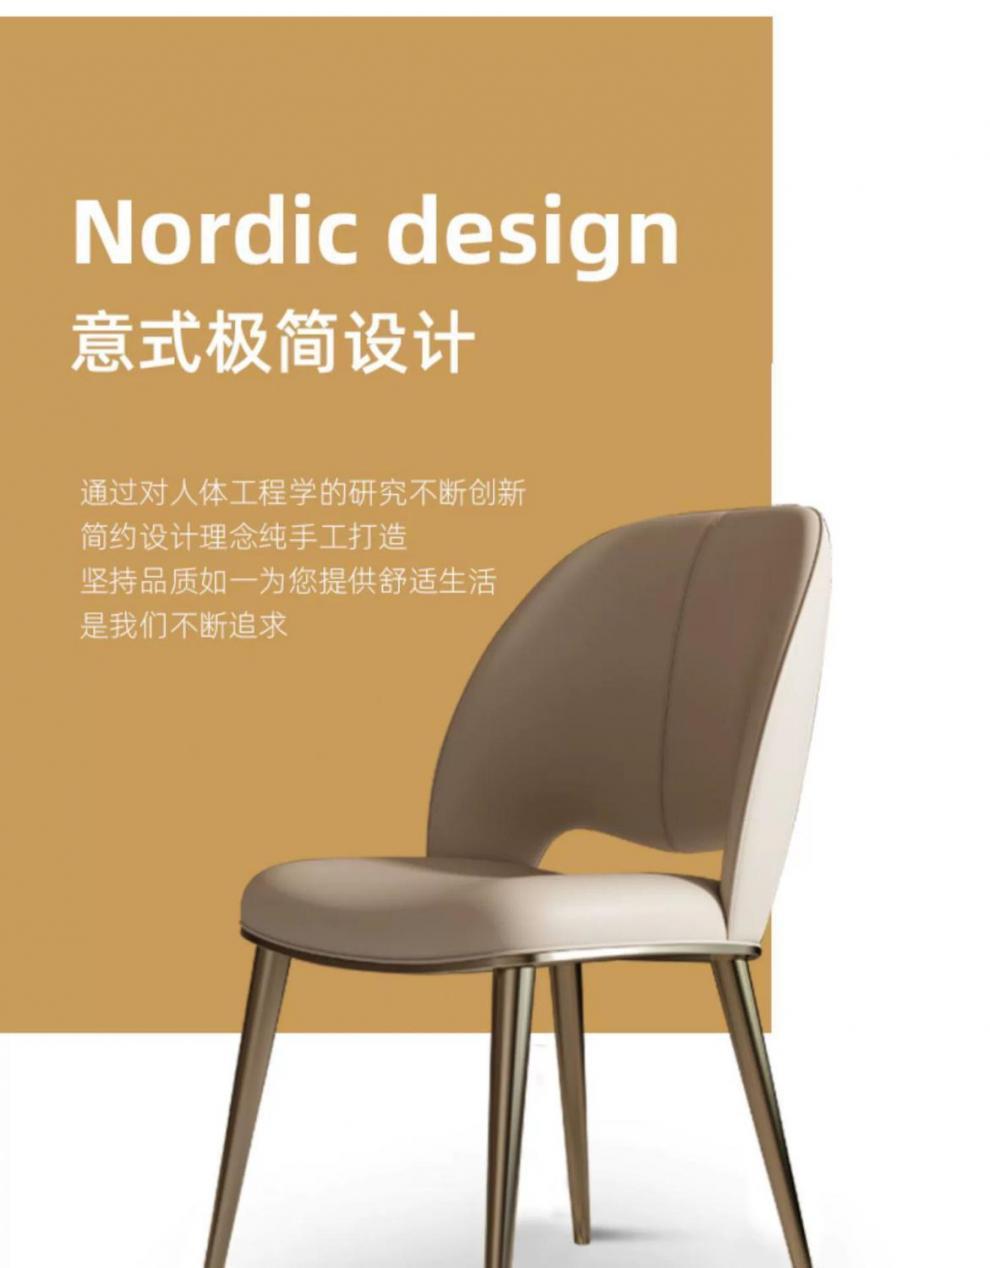 3L light luxury Nordic leather dining chair (shipping not included)